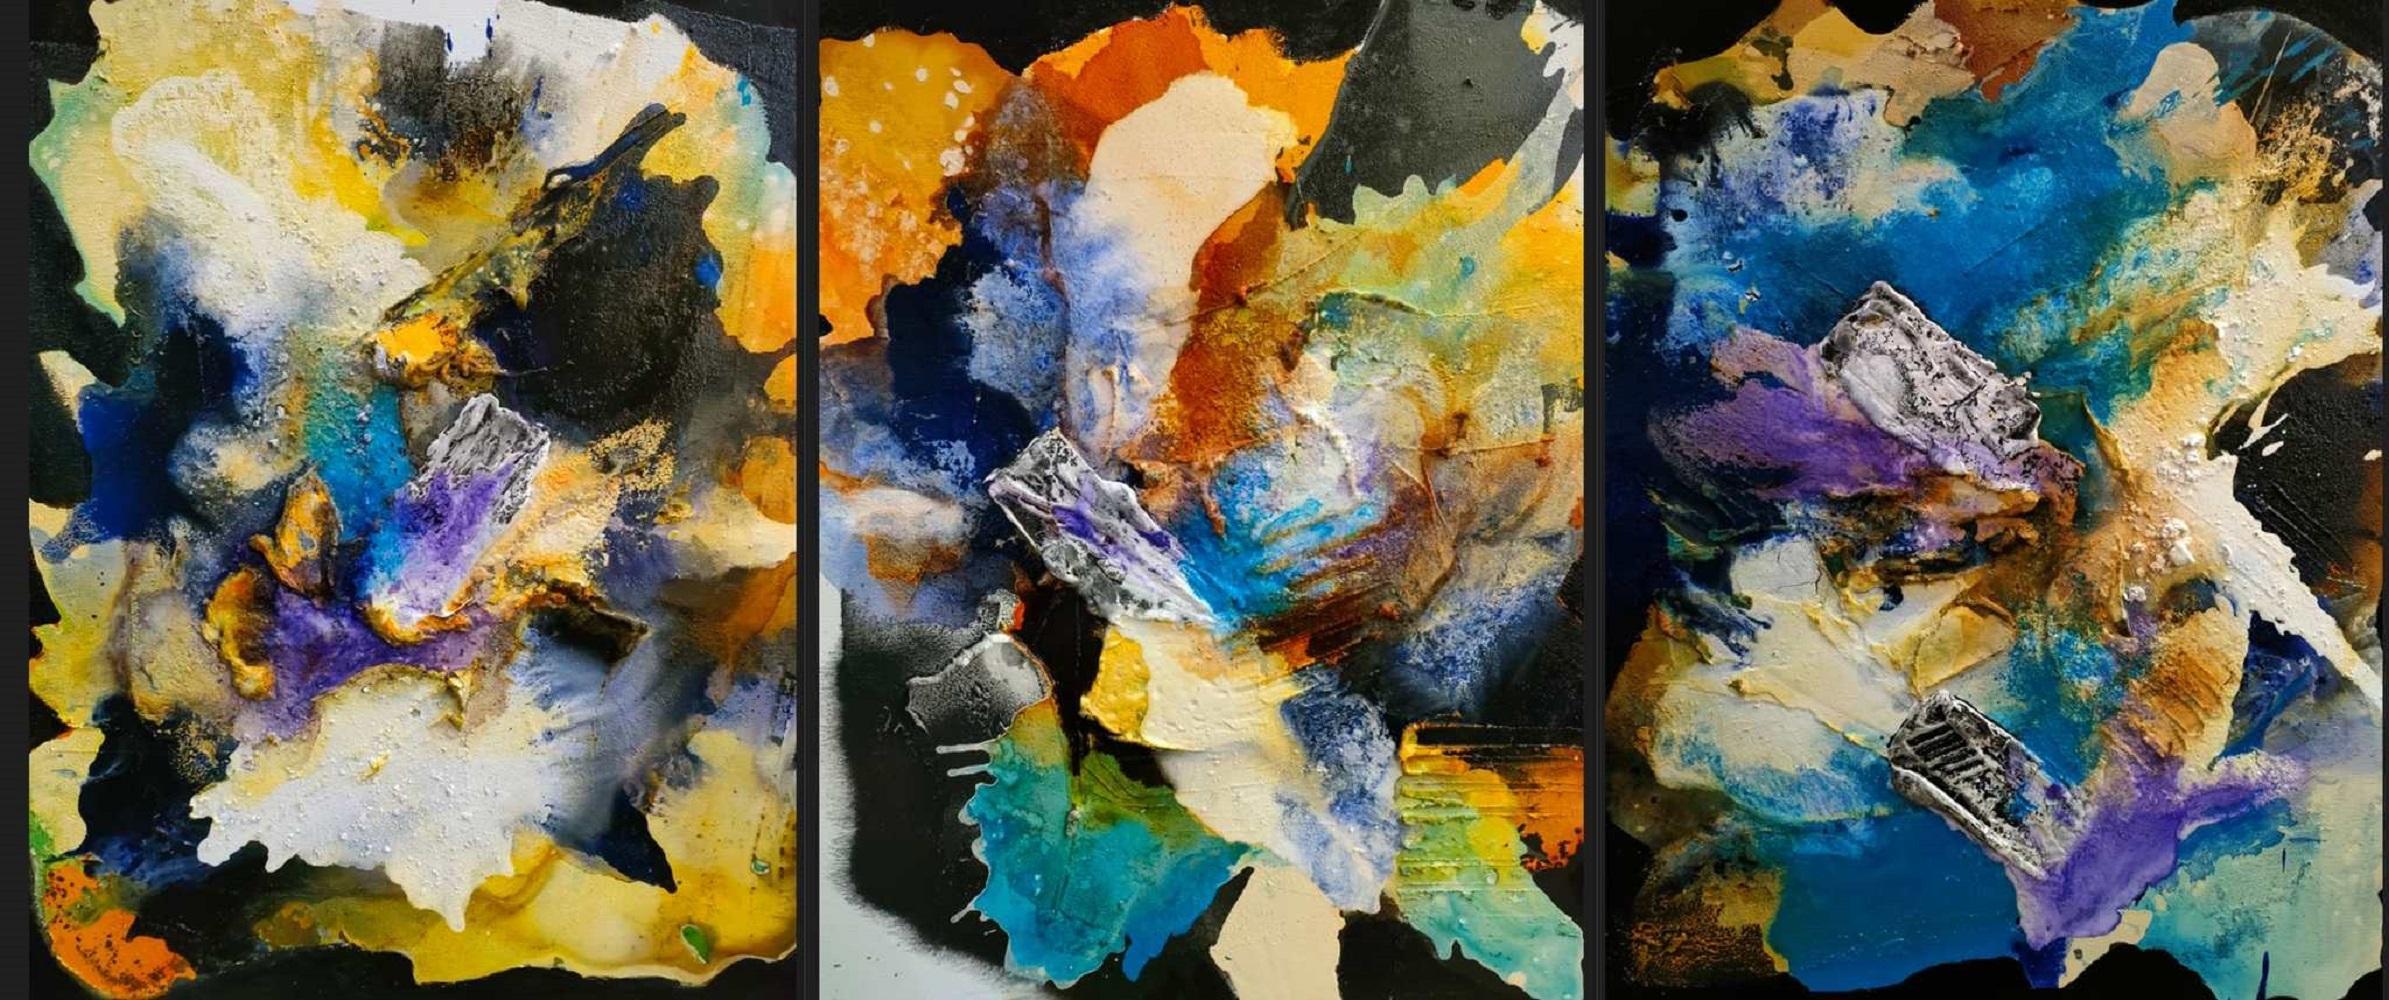 Michal Jamiol Abstract Painting - Dance Of Blue Stars Triptych